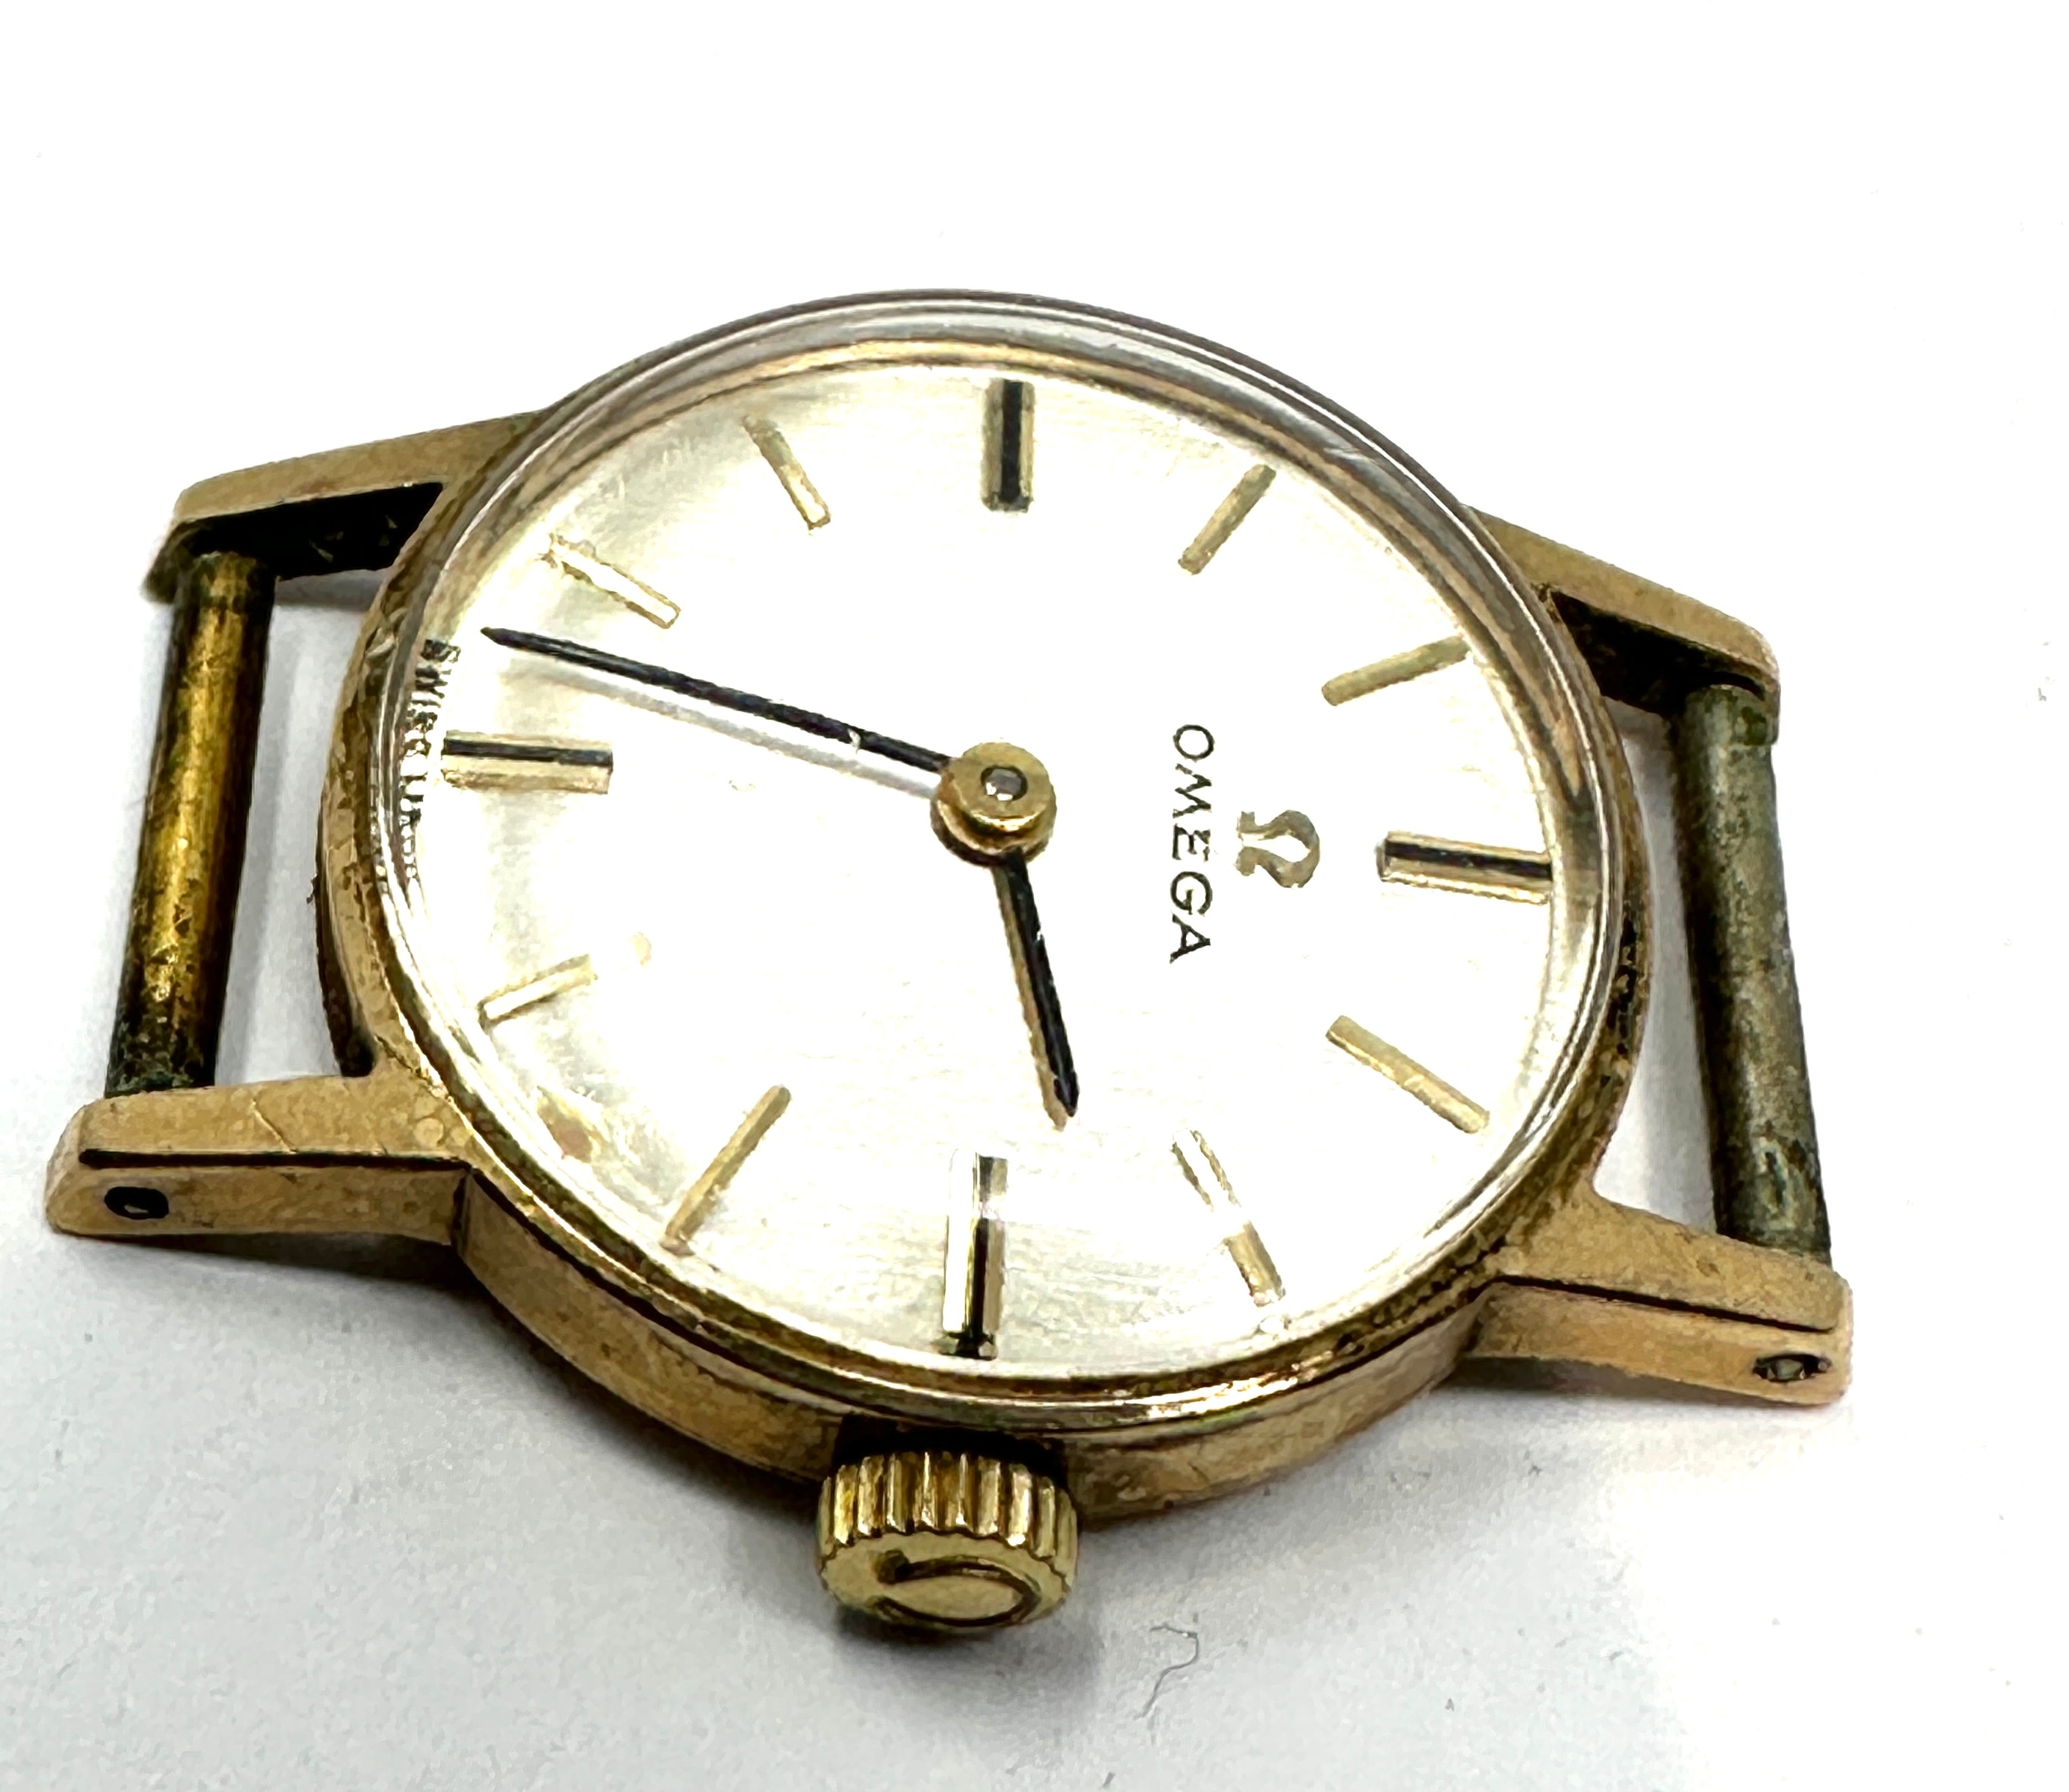 9ct gold ladies omega wristwatch the watch is ticking - Image 2 of 3